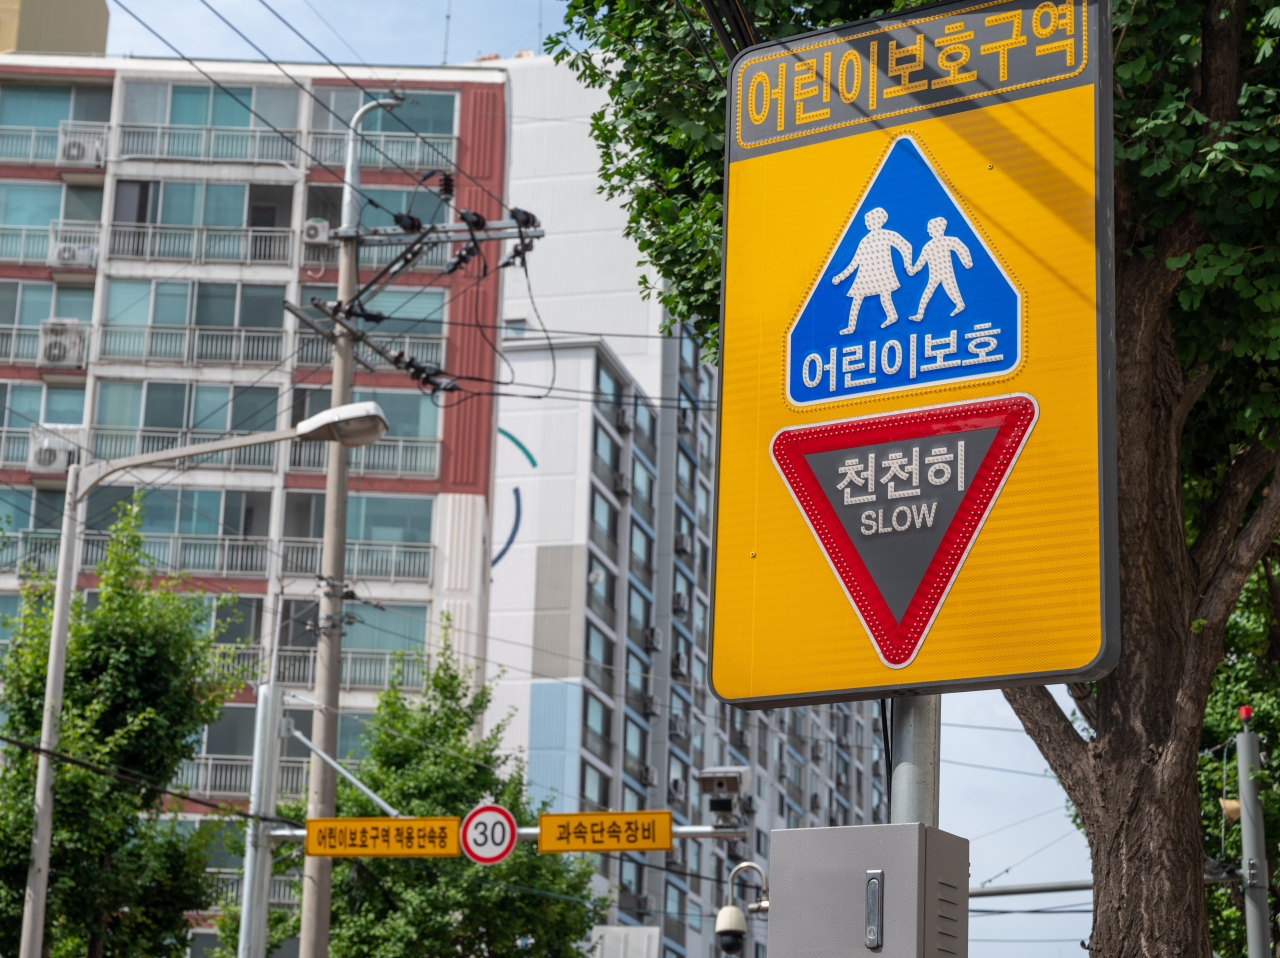 A school zone traffic sign in Seoul, South Korea (Getty Images Bank)